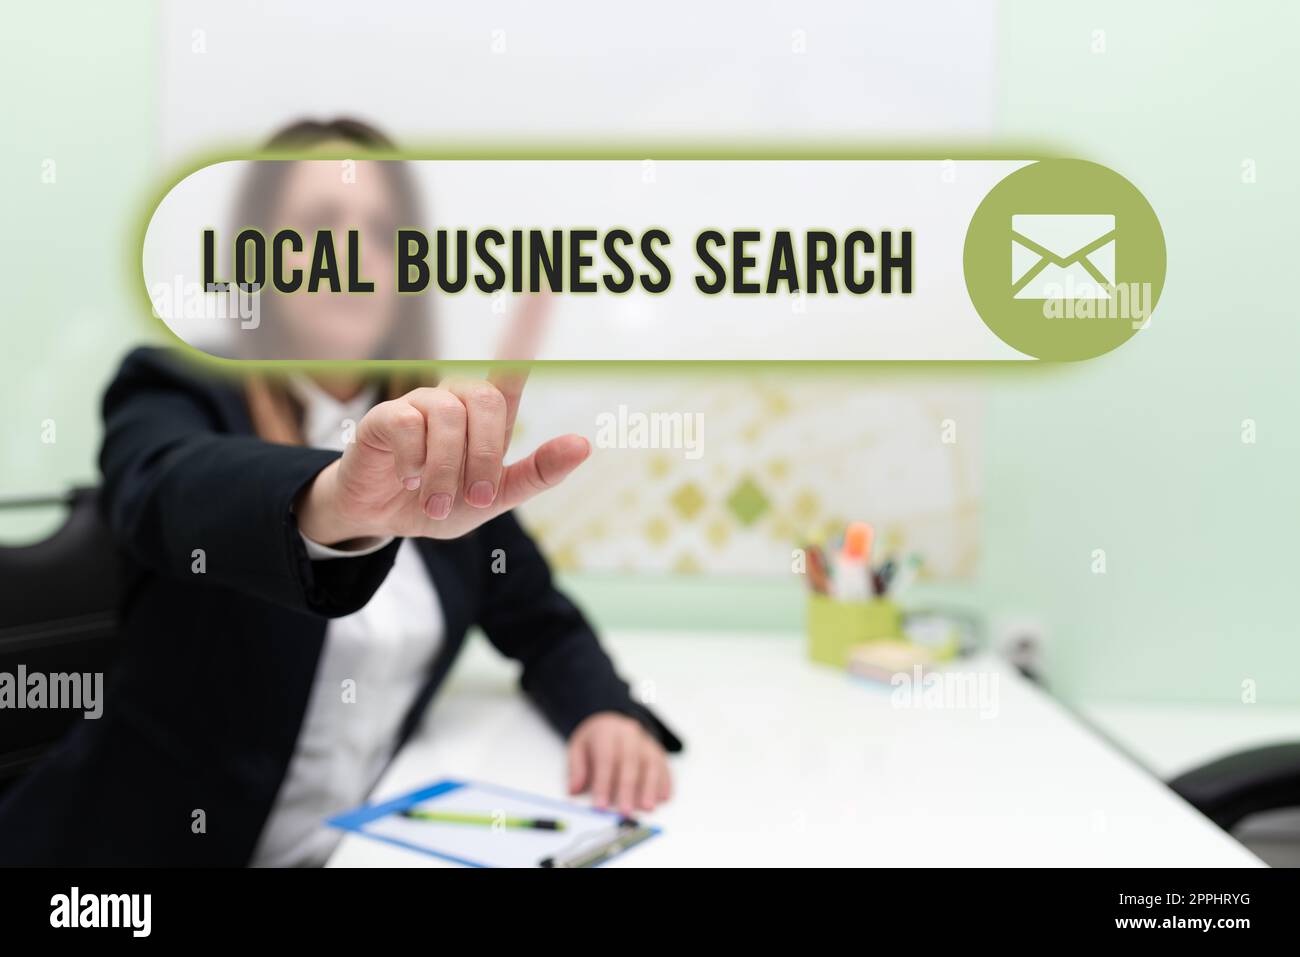 Text sign showing Local Business Search. Concept meaning looking for product or service that is locally located Stock Photo